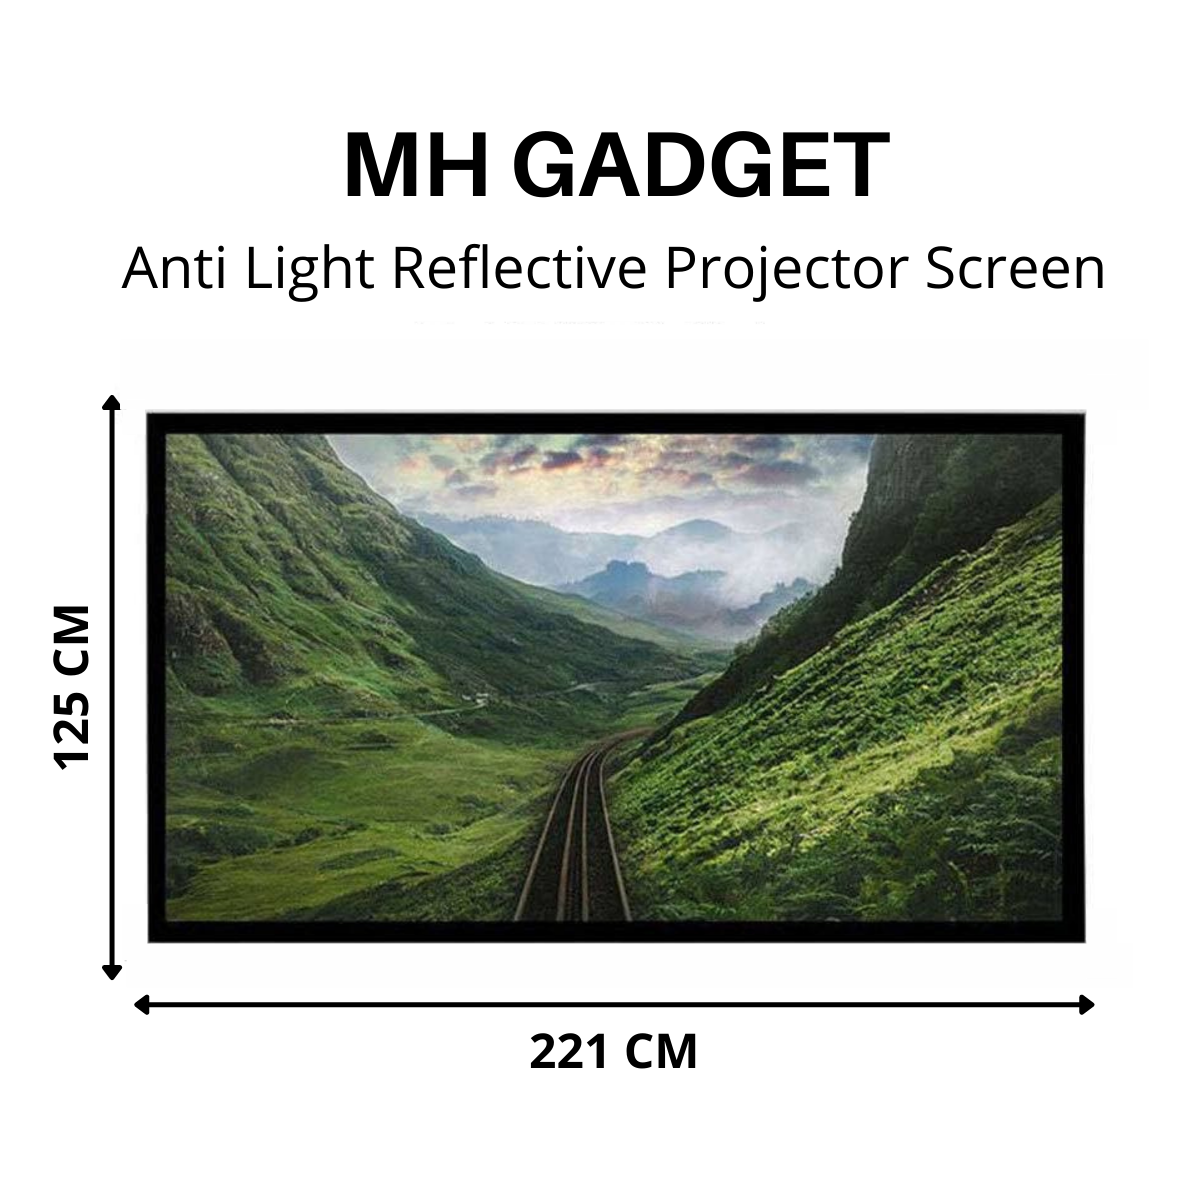 100 Inch Anti Light Reflective Projector Screen